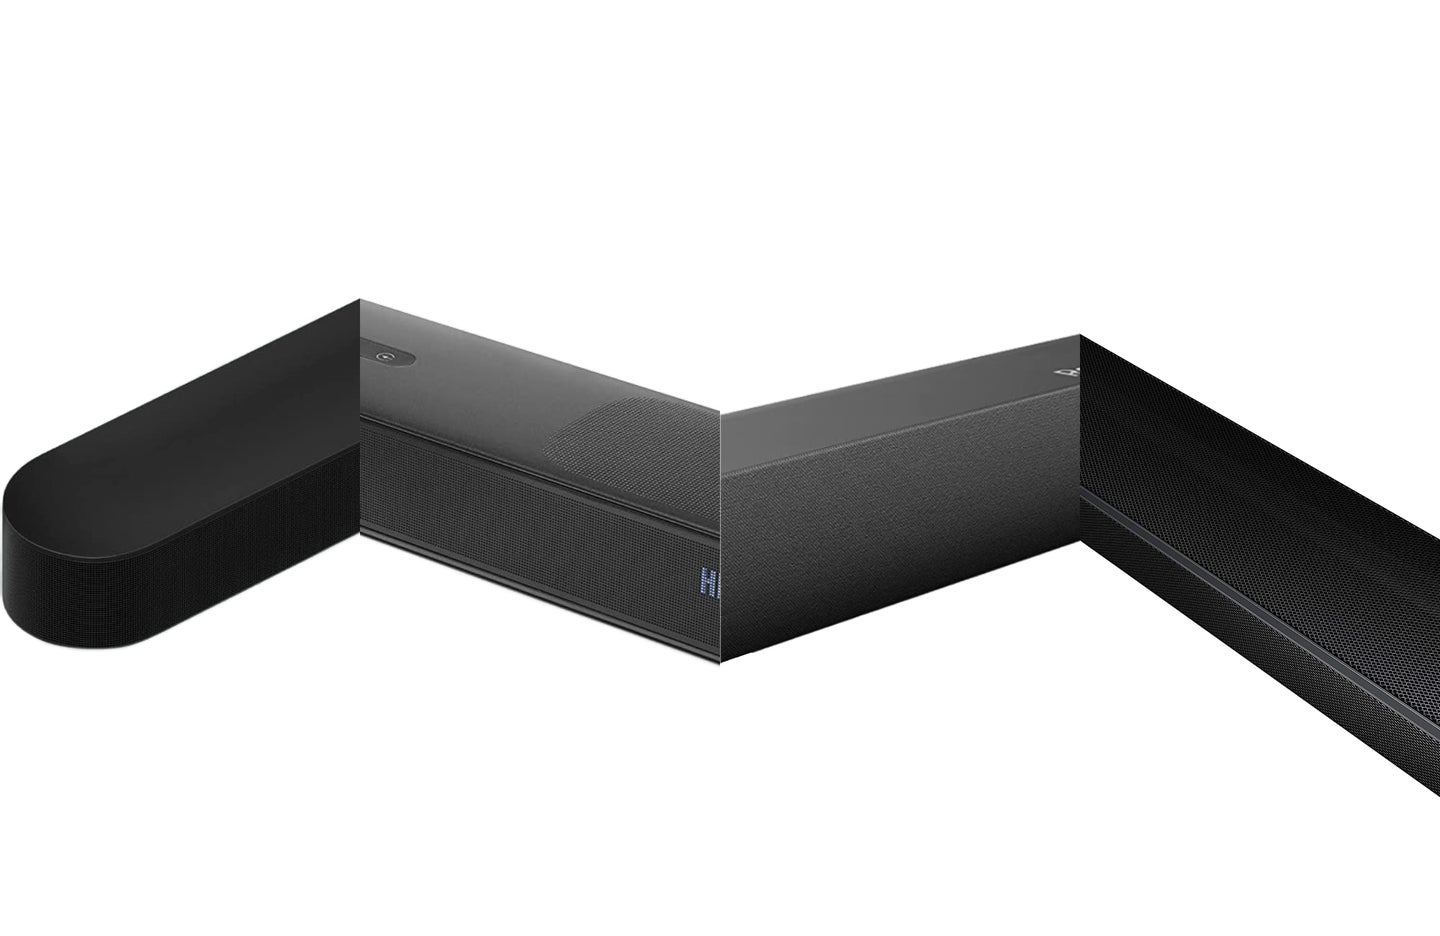 The best soundbars under $500 add more punch than their pricetags suggest.